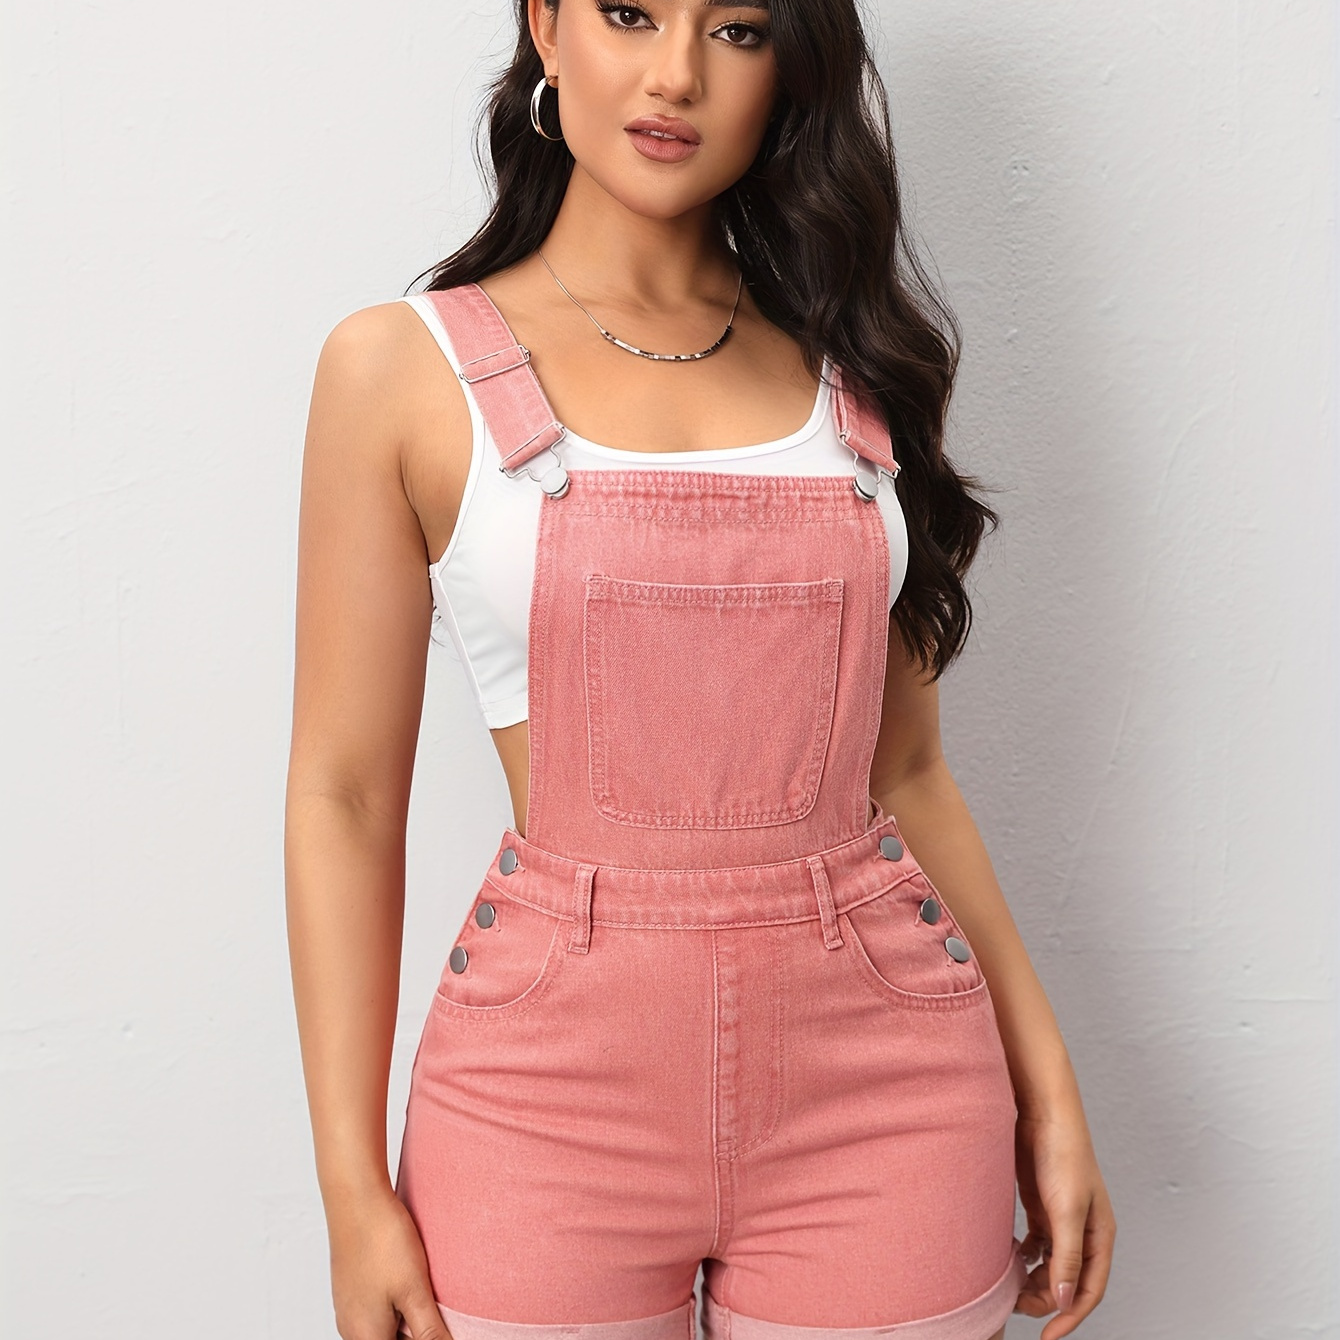 

Women's Casual Pinkish Pastel Color Denim Overalls, Shortalls With Pocket Detail, Buttoned Straps, Summer Fashion, Adjustable Fit